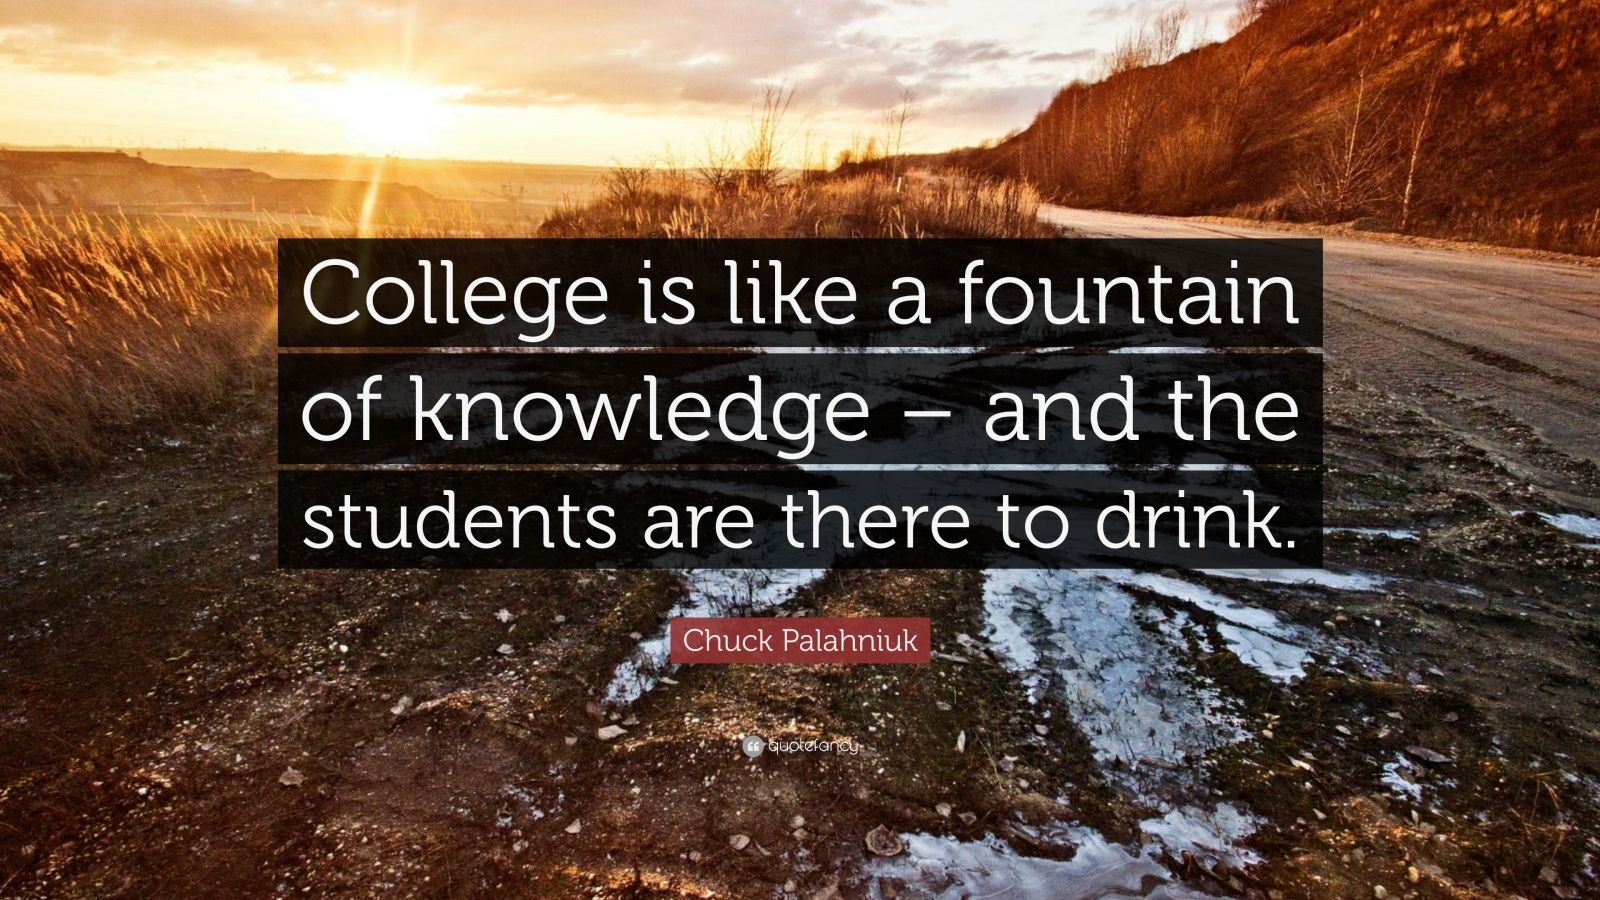 Chuck Palahniuk Quote: “College is like a fountain of knowledge – and